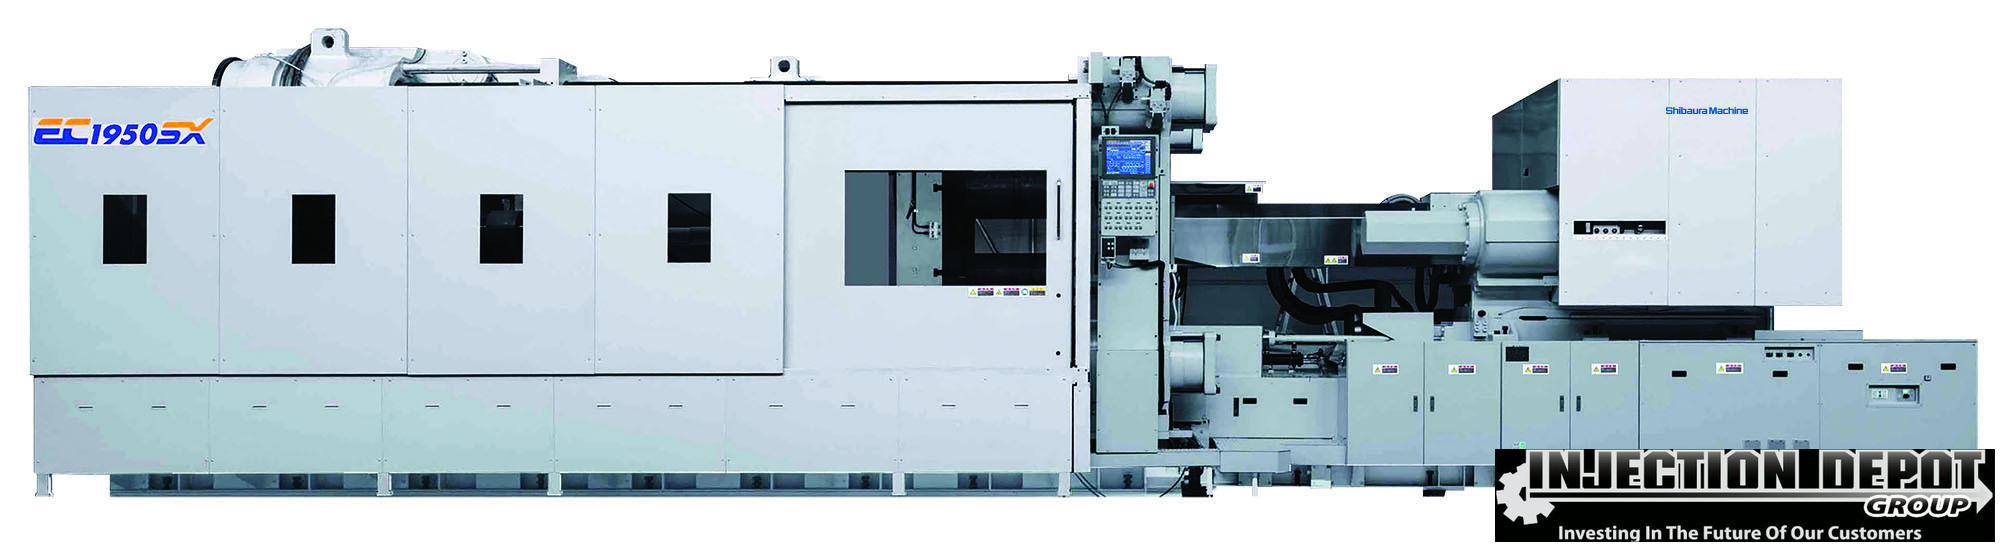 SHIBAURA MACHINE All Electric EC SXIII Horizontal Injection Moulding Machines | INJECTION DEPOT GROUP